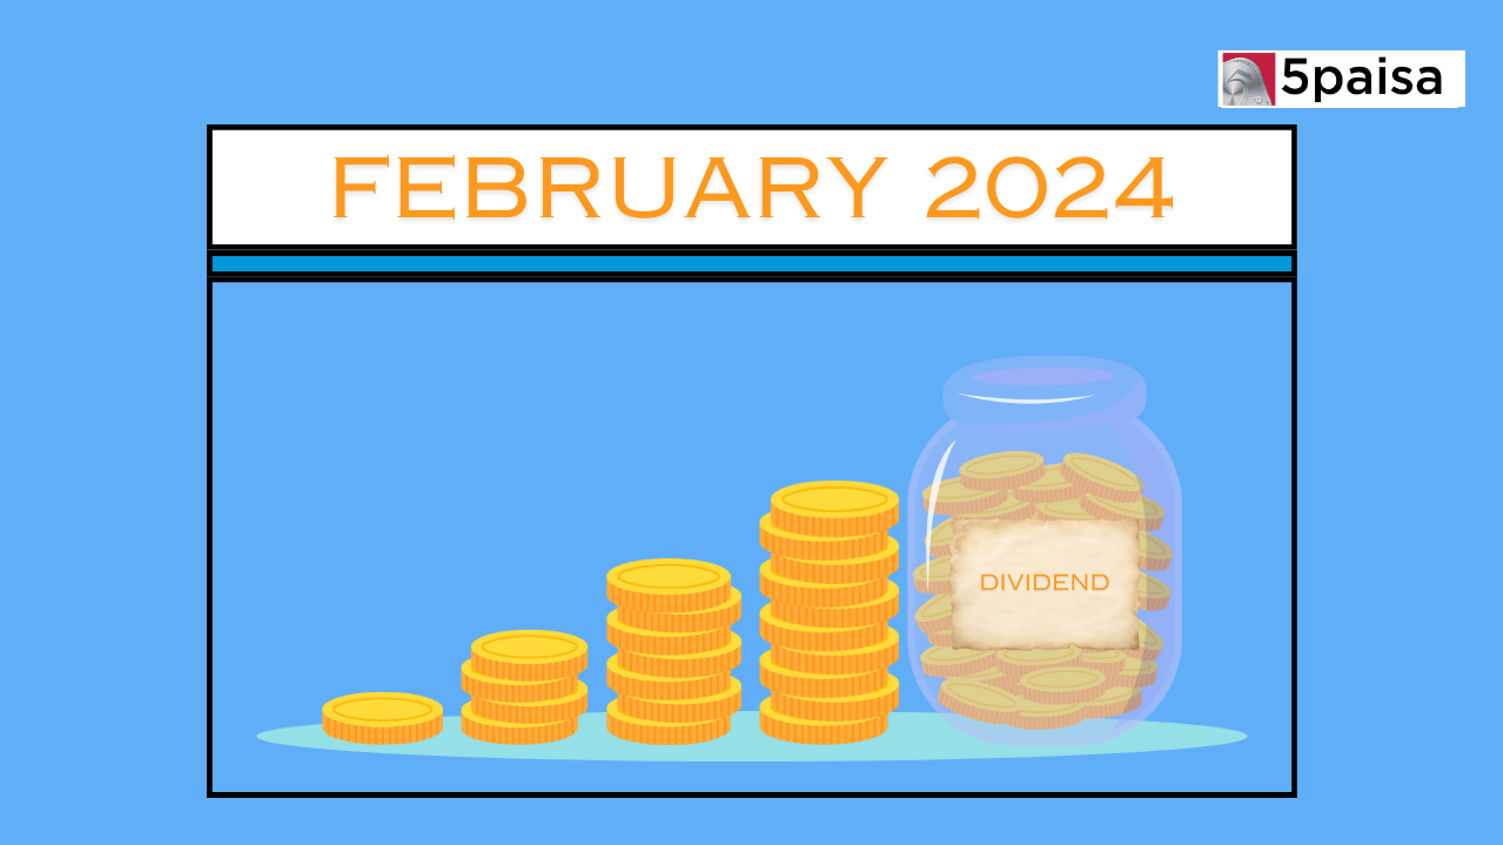 Upcoming Dividends in February 2024